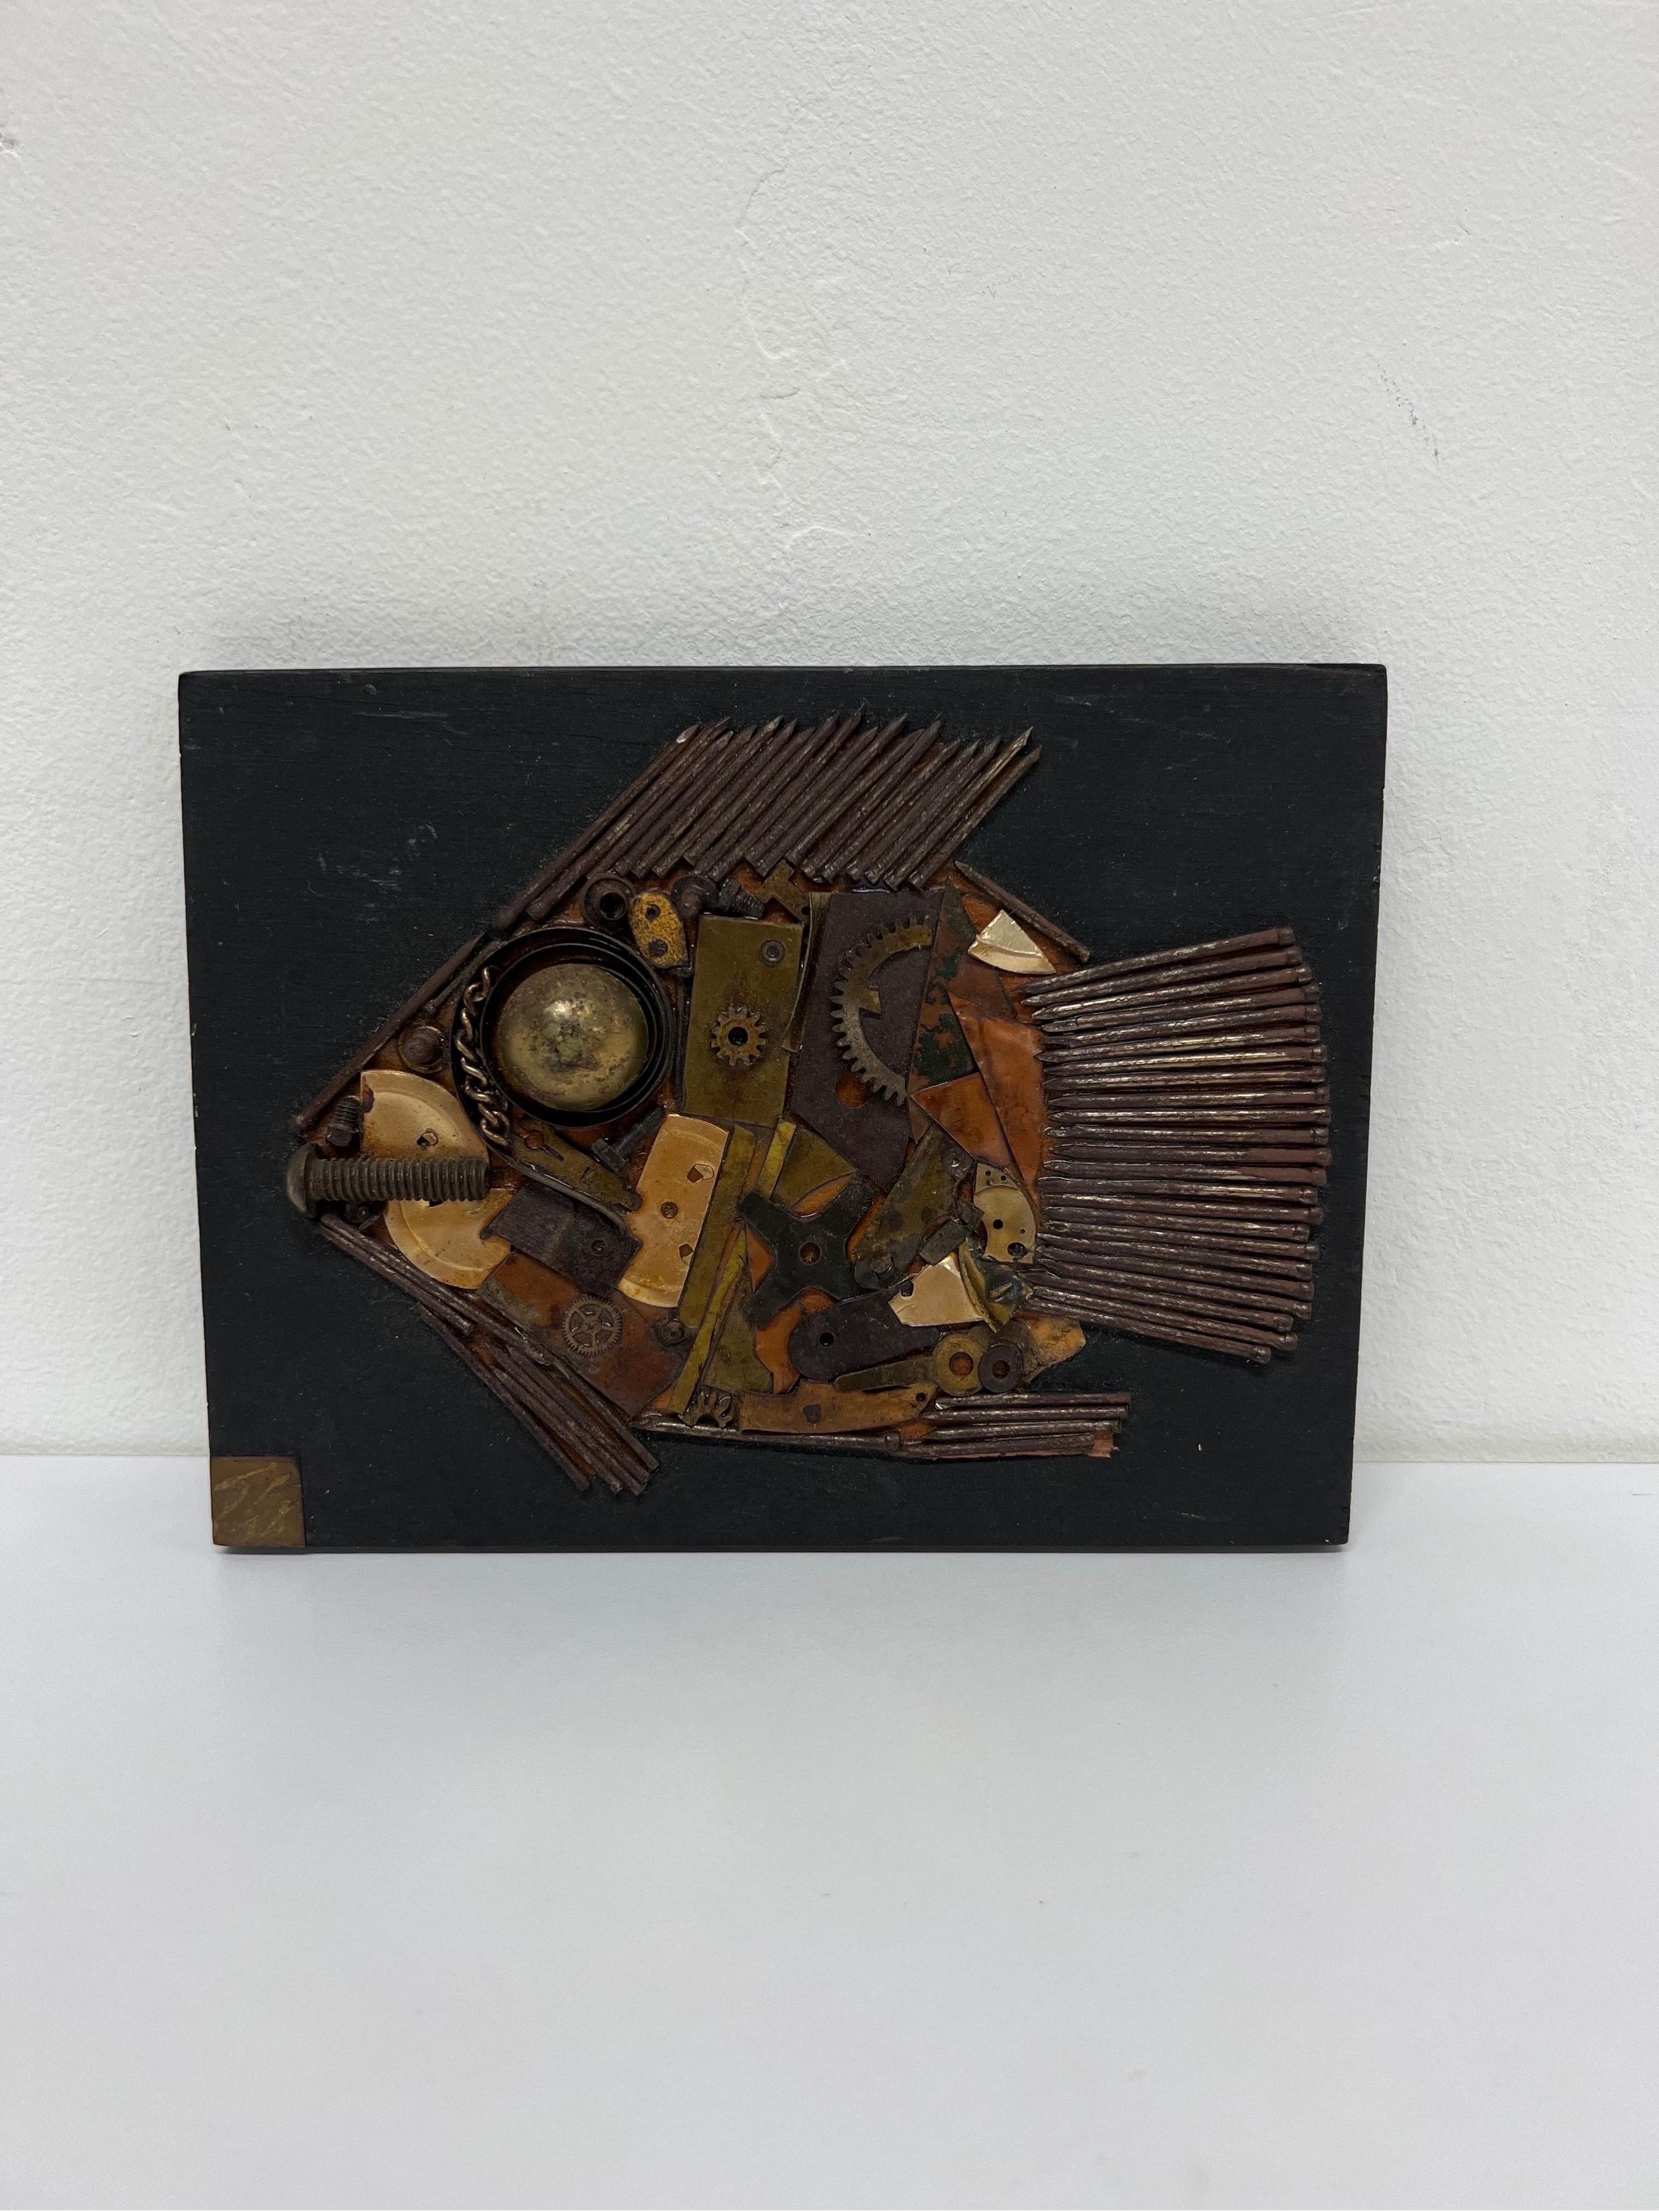 Mid-century modernist abstract fish sculpture by Brazilian artist, Shih Hwa. Assemblage comprised of gears, nails, etc and is mounted to a black wood board. Metal plaque on front with signature. Paper label on back with raisonné.